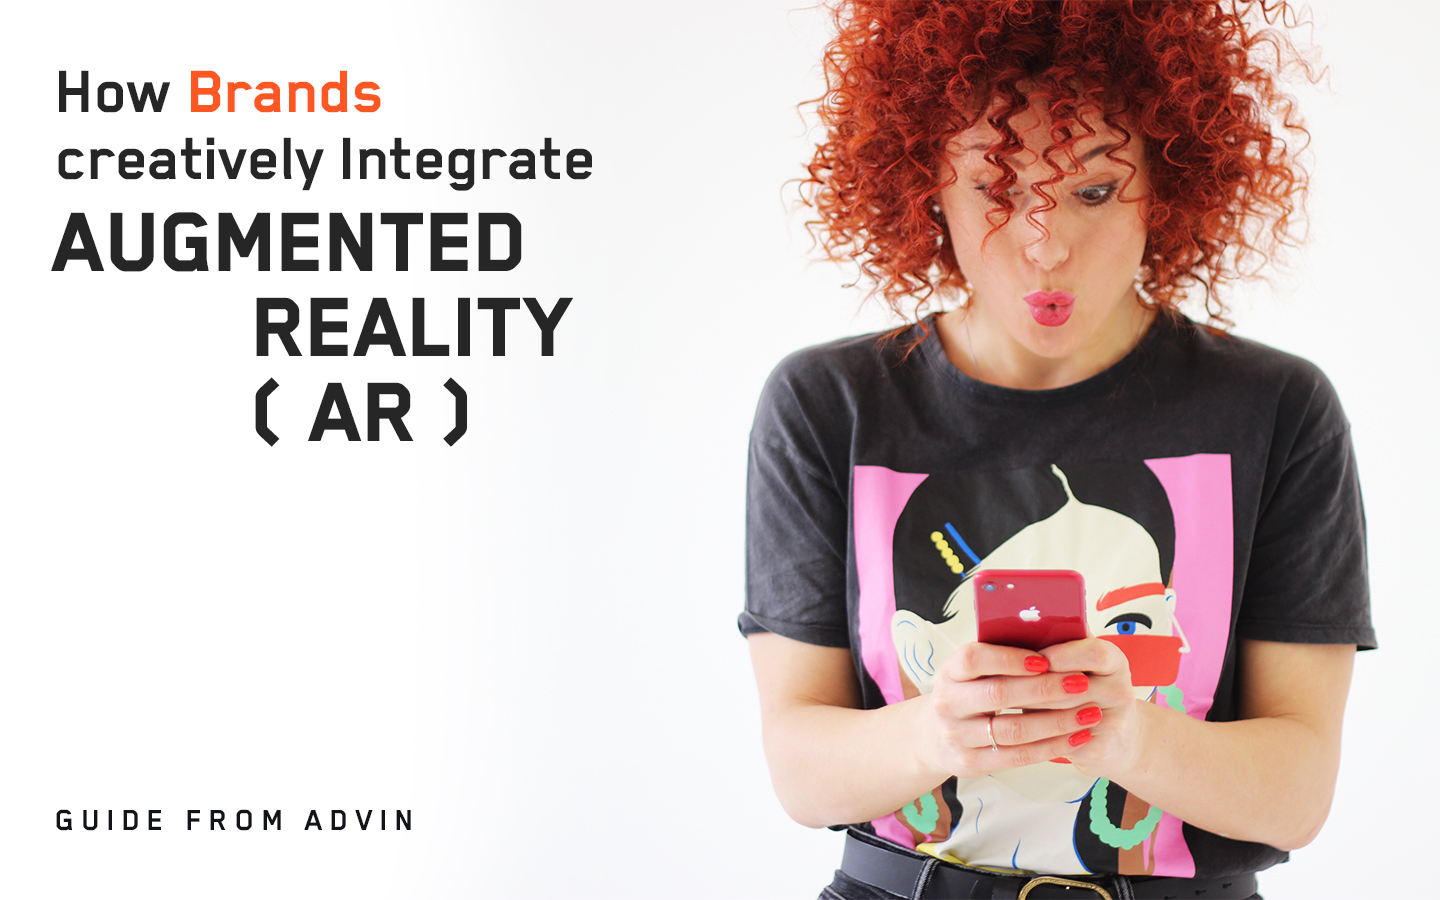 HOW CAN A BRAND CREATIVELY INTEGRATE AUGMENTED REALITY INTO BUSINESS